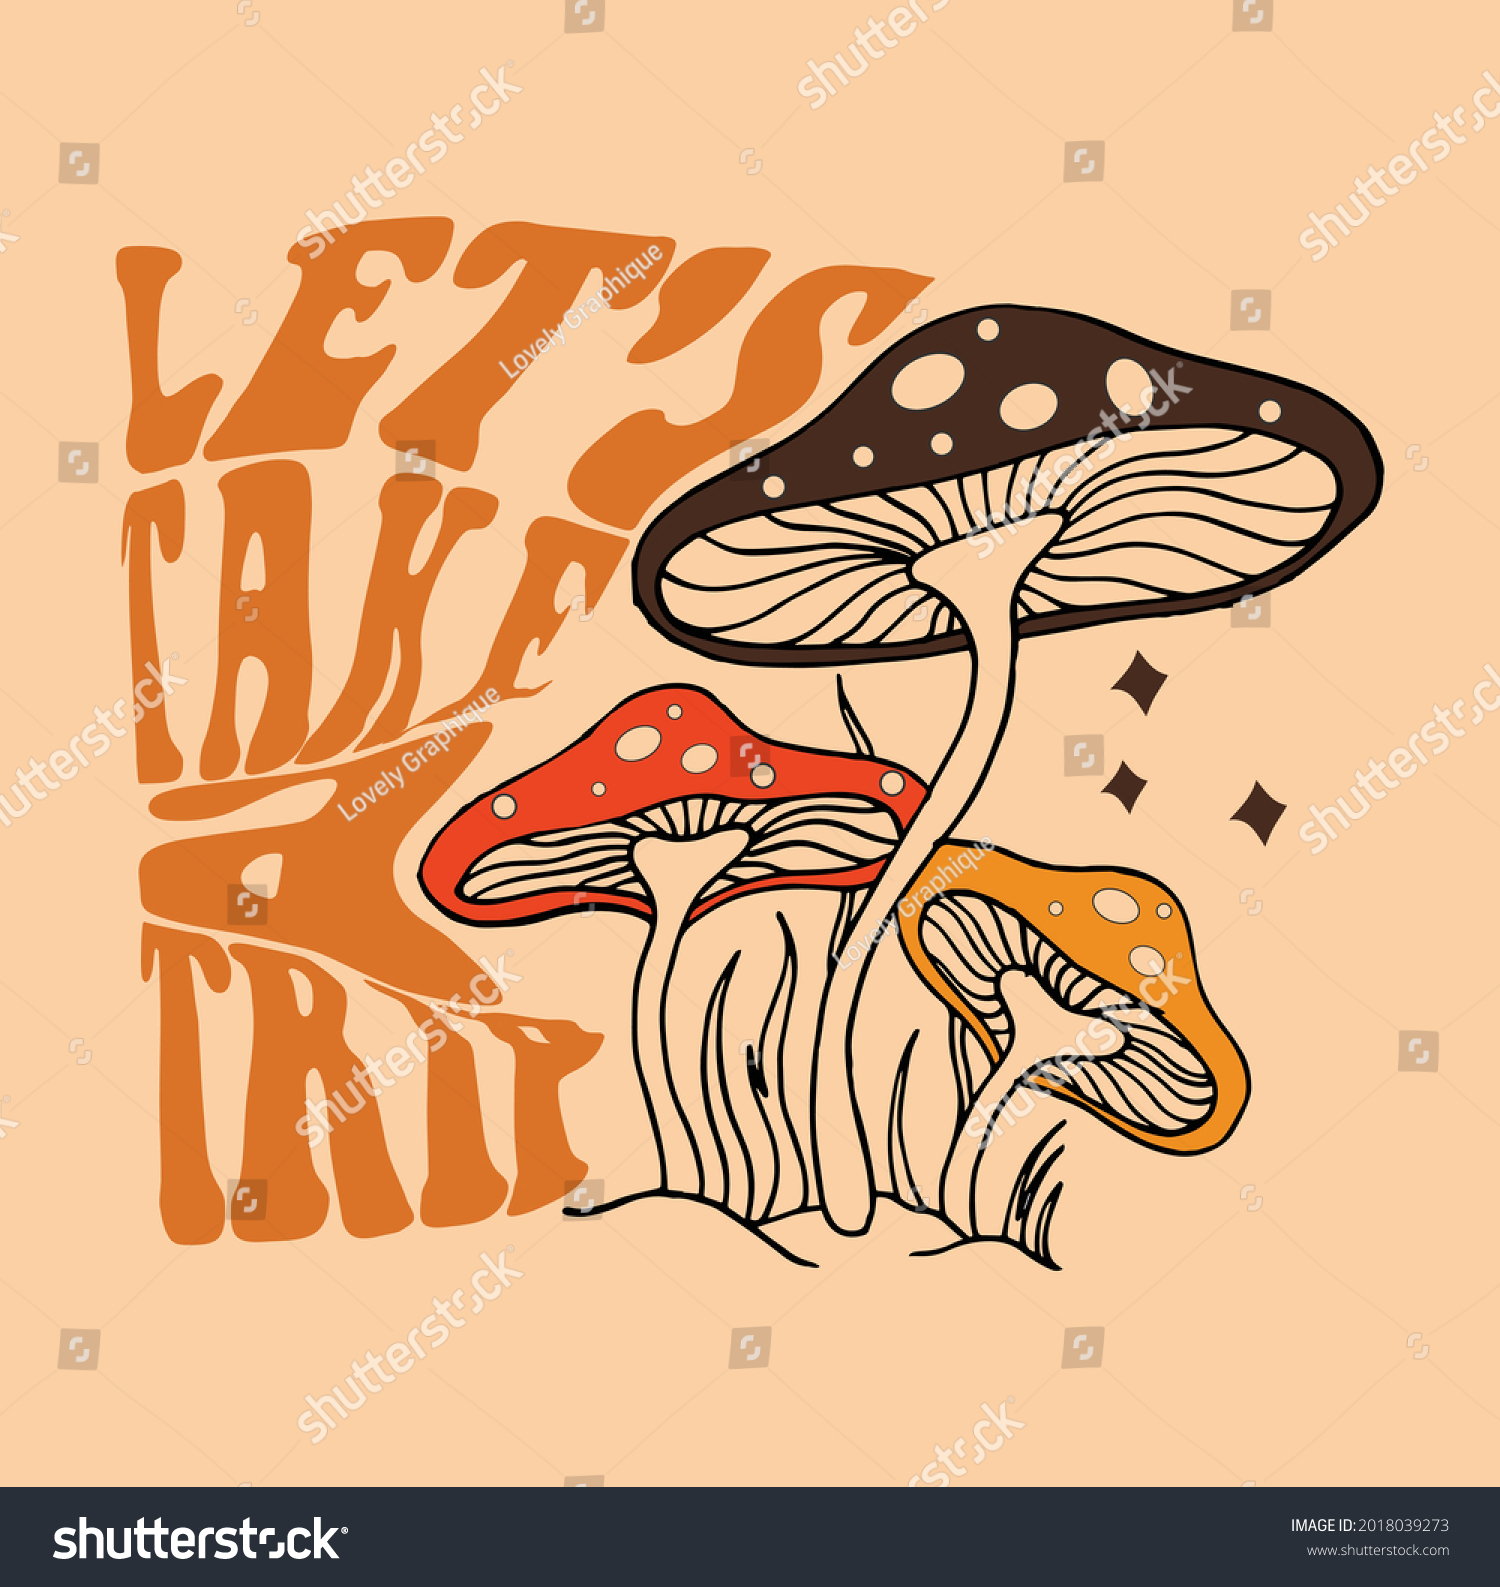 Let's take a trip Slogan Print with Hippie Style Mushrooms Background, 70's Groovy Themed Hand Drawn Abstract Graphic Tee Vector Sticker #2018039273